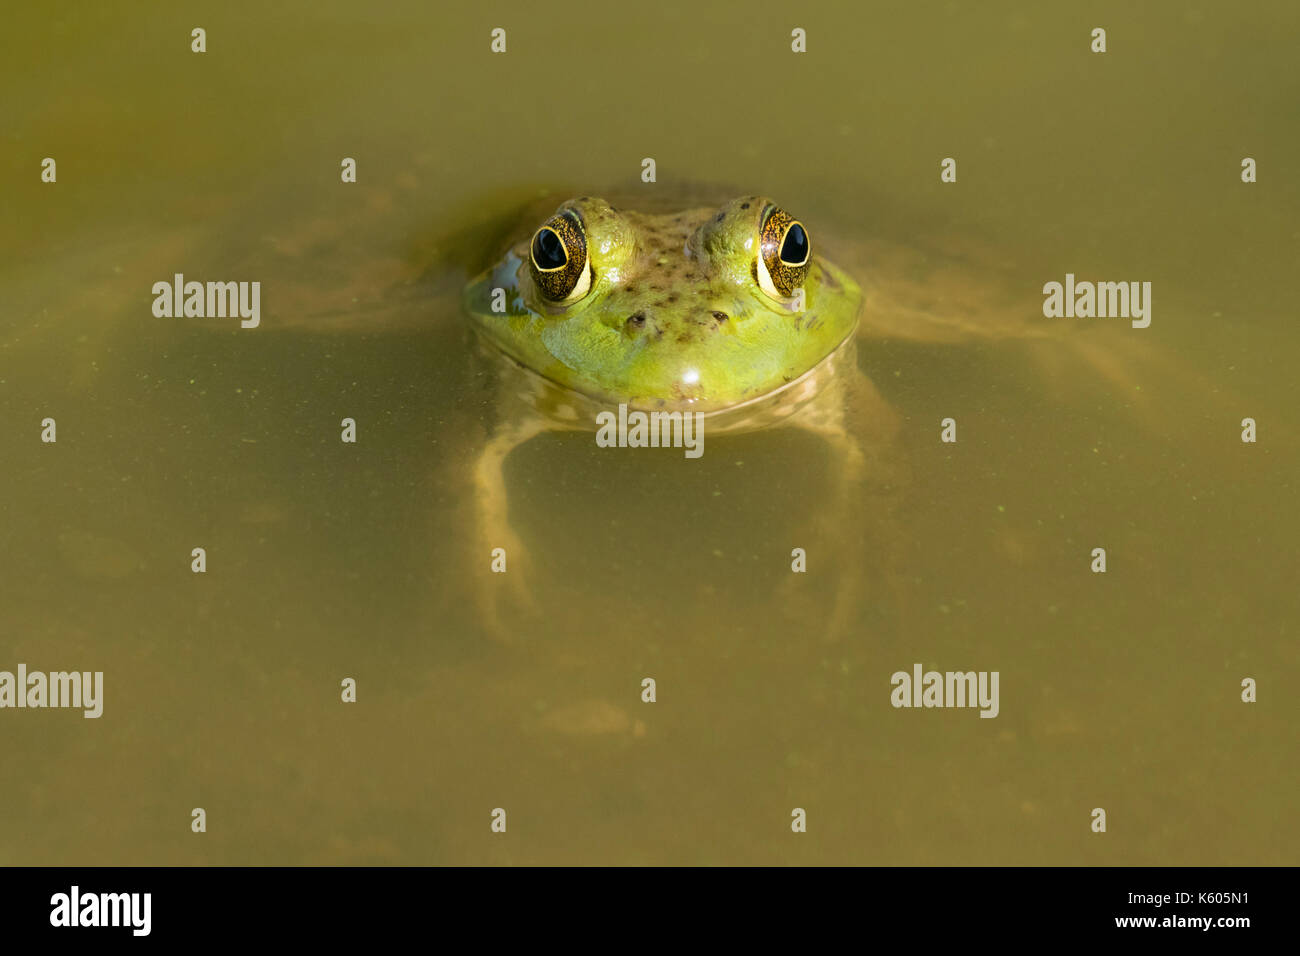 American billfrog (Lithobates catesbeianus) submerged in water in a forest lake, Ames, Iowa, USA Stock Photo